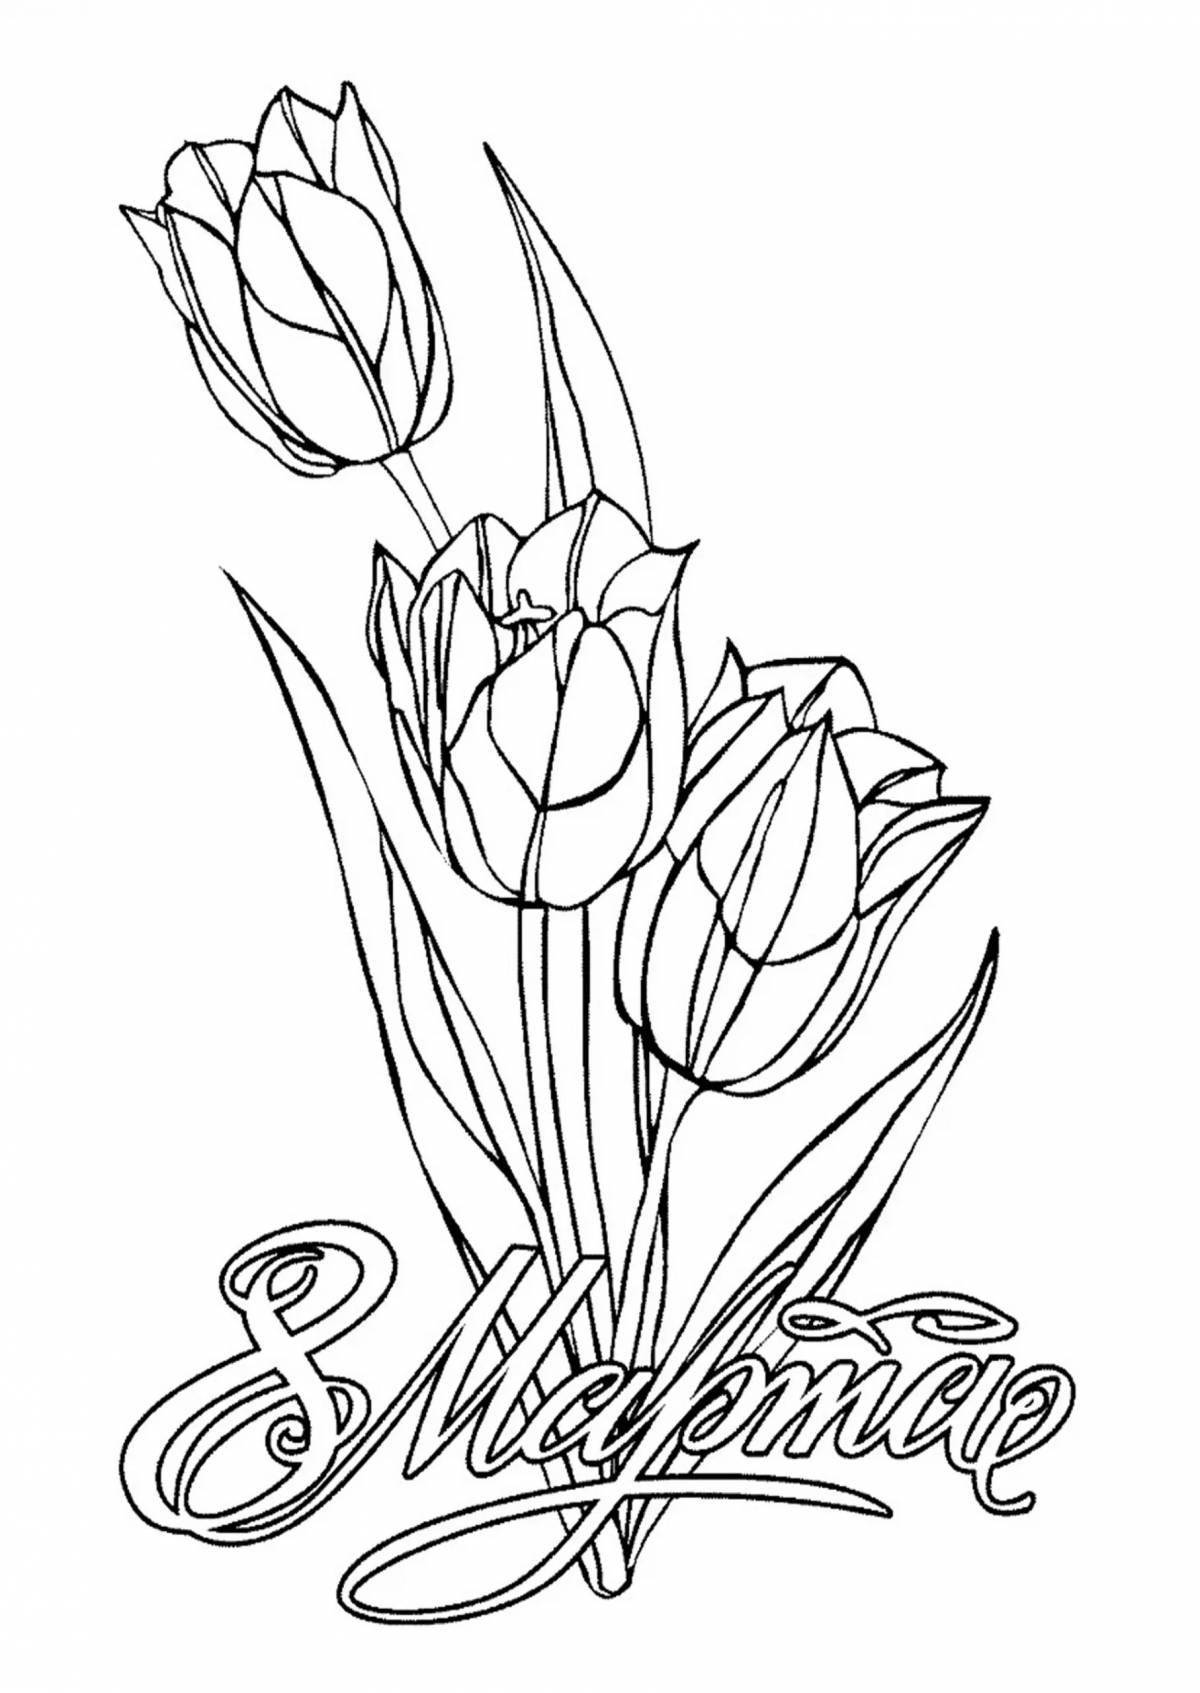 Coloring book bright tulips for March 8